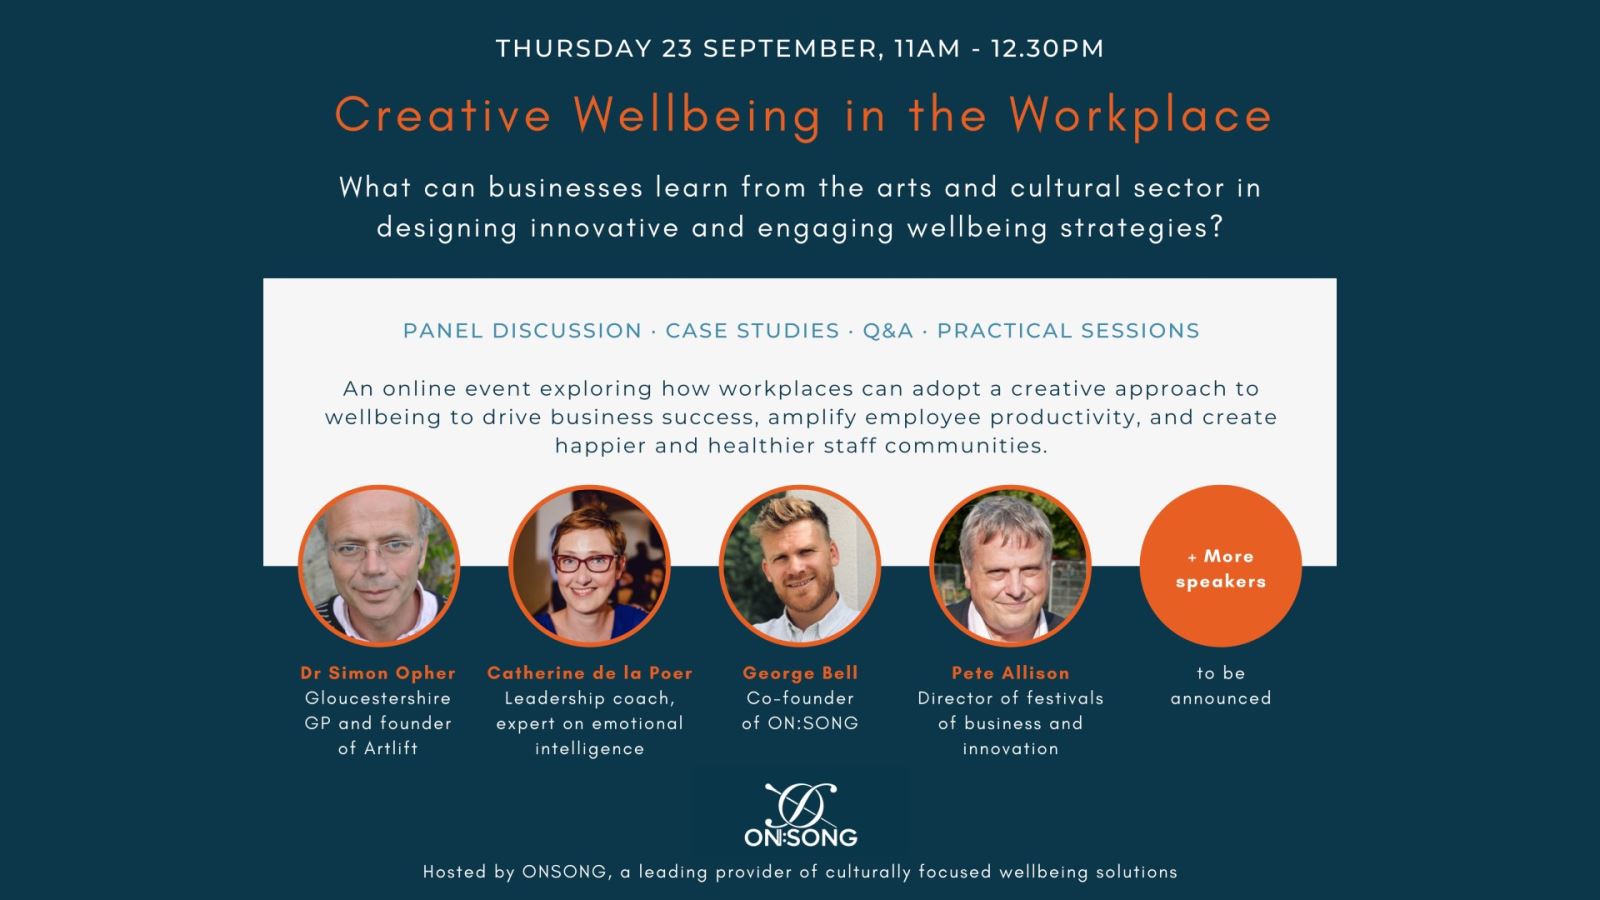 How can businesses design innovative and engaging wellbeing strategies?